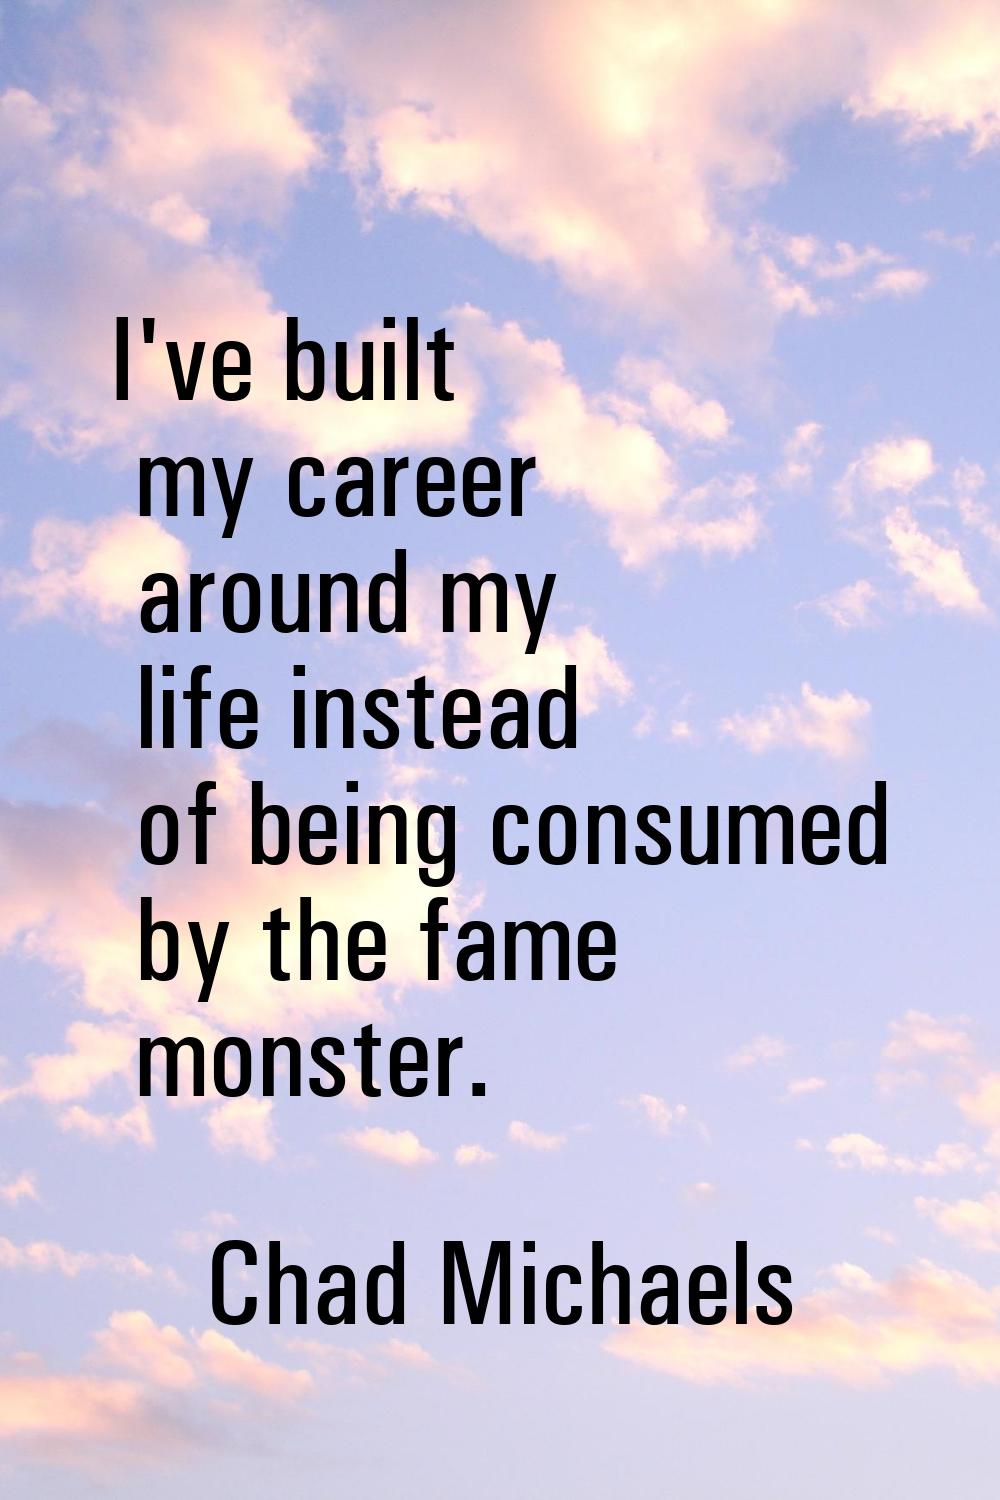 I've built my career around my life instead of being consumed by the fame monster.